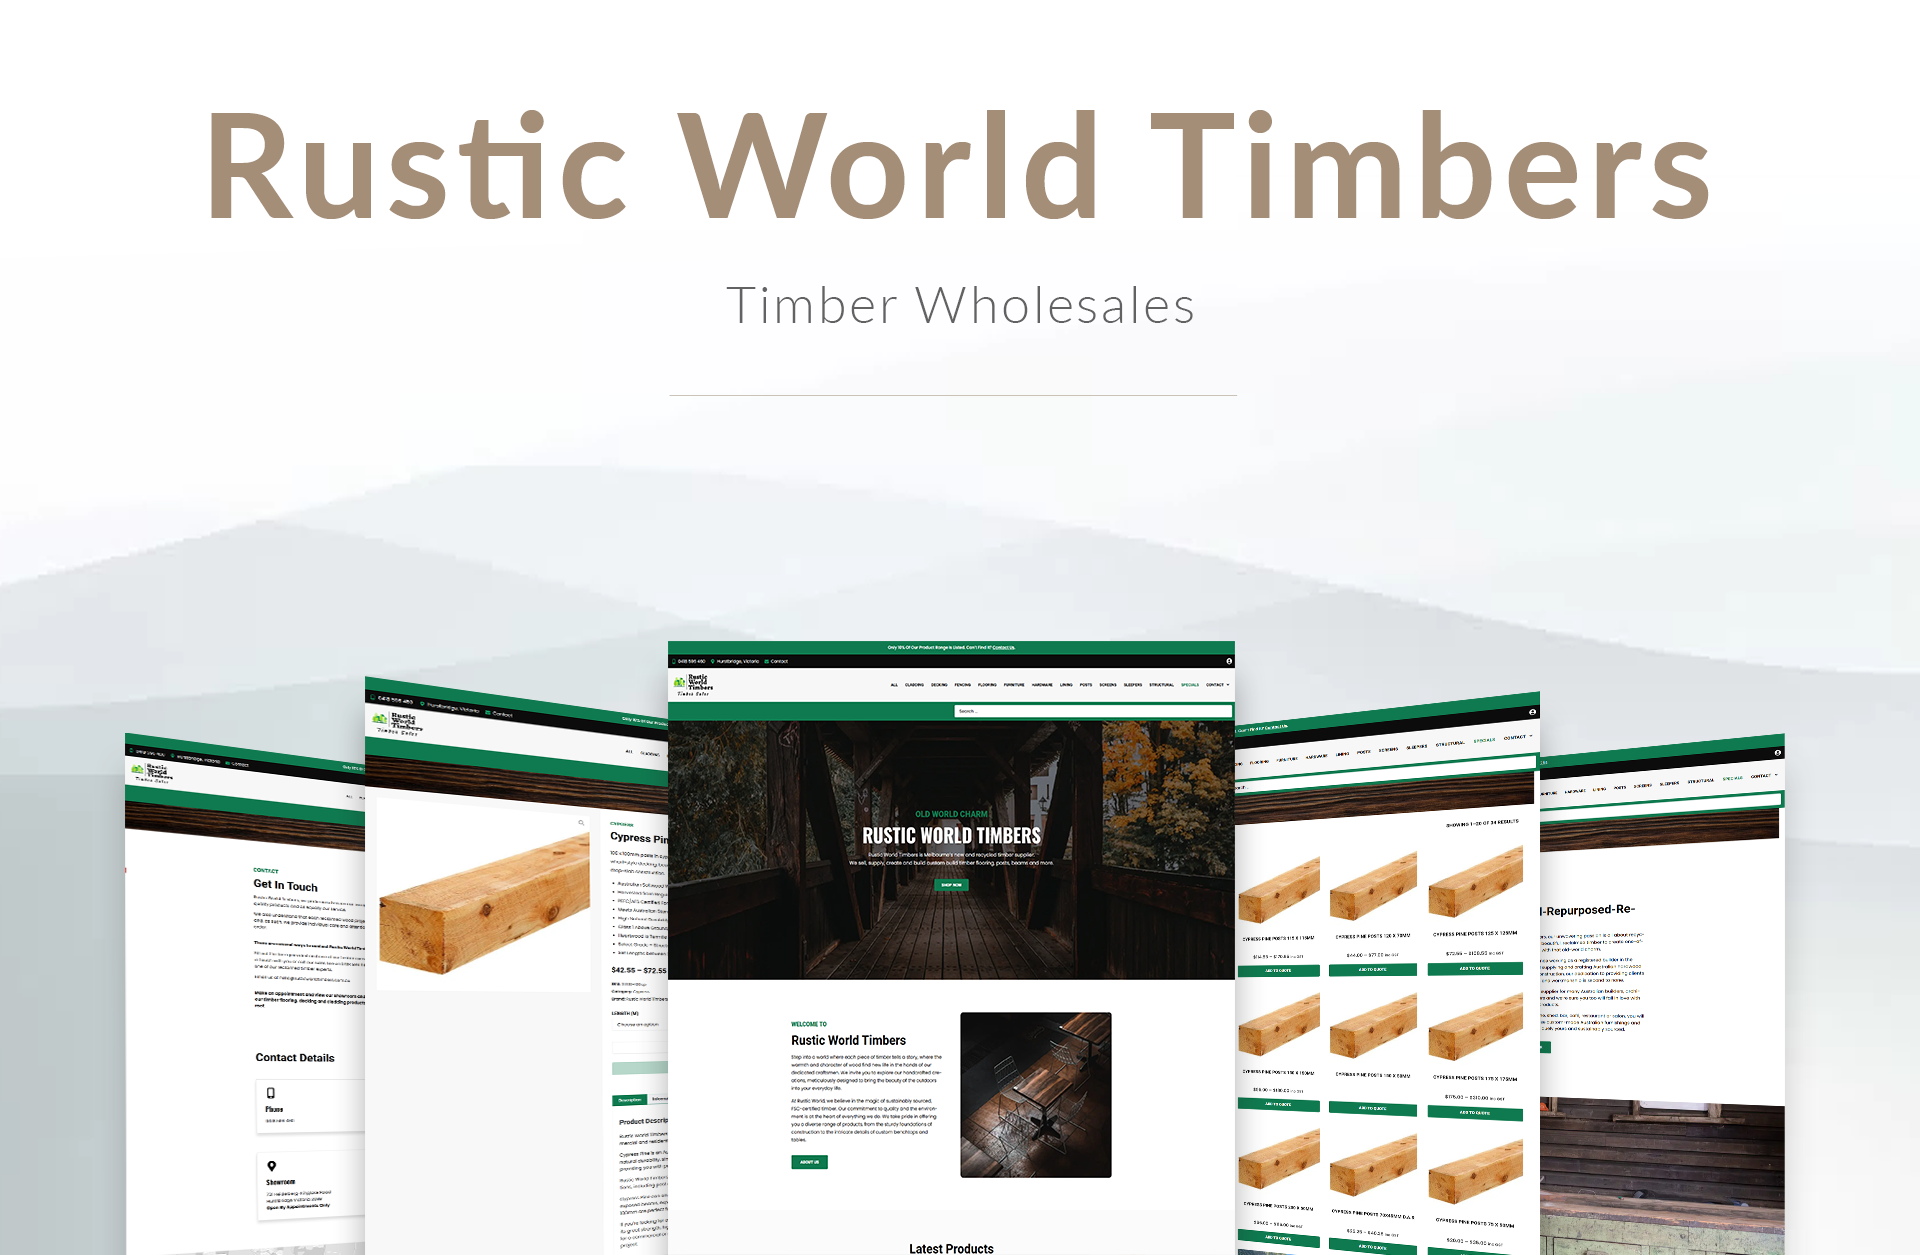 Rustic World Timbers Wholesales - Rustic World Timbers